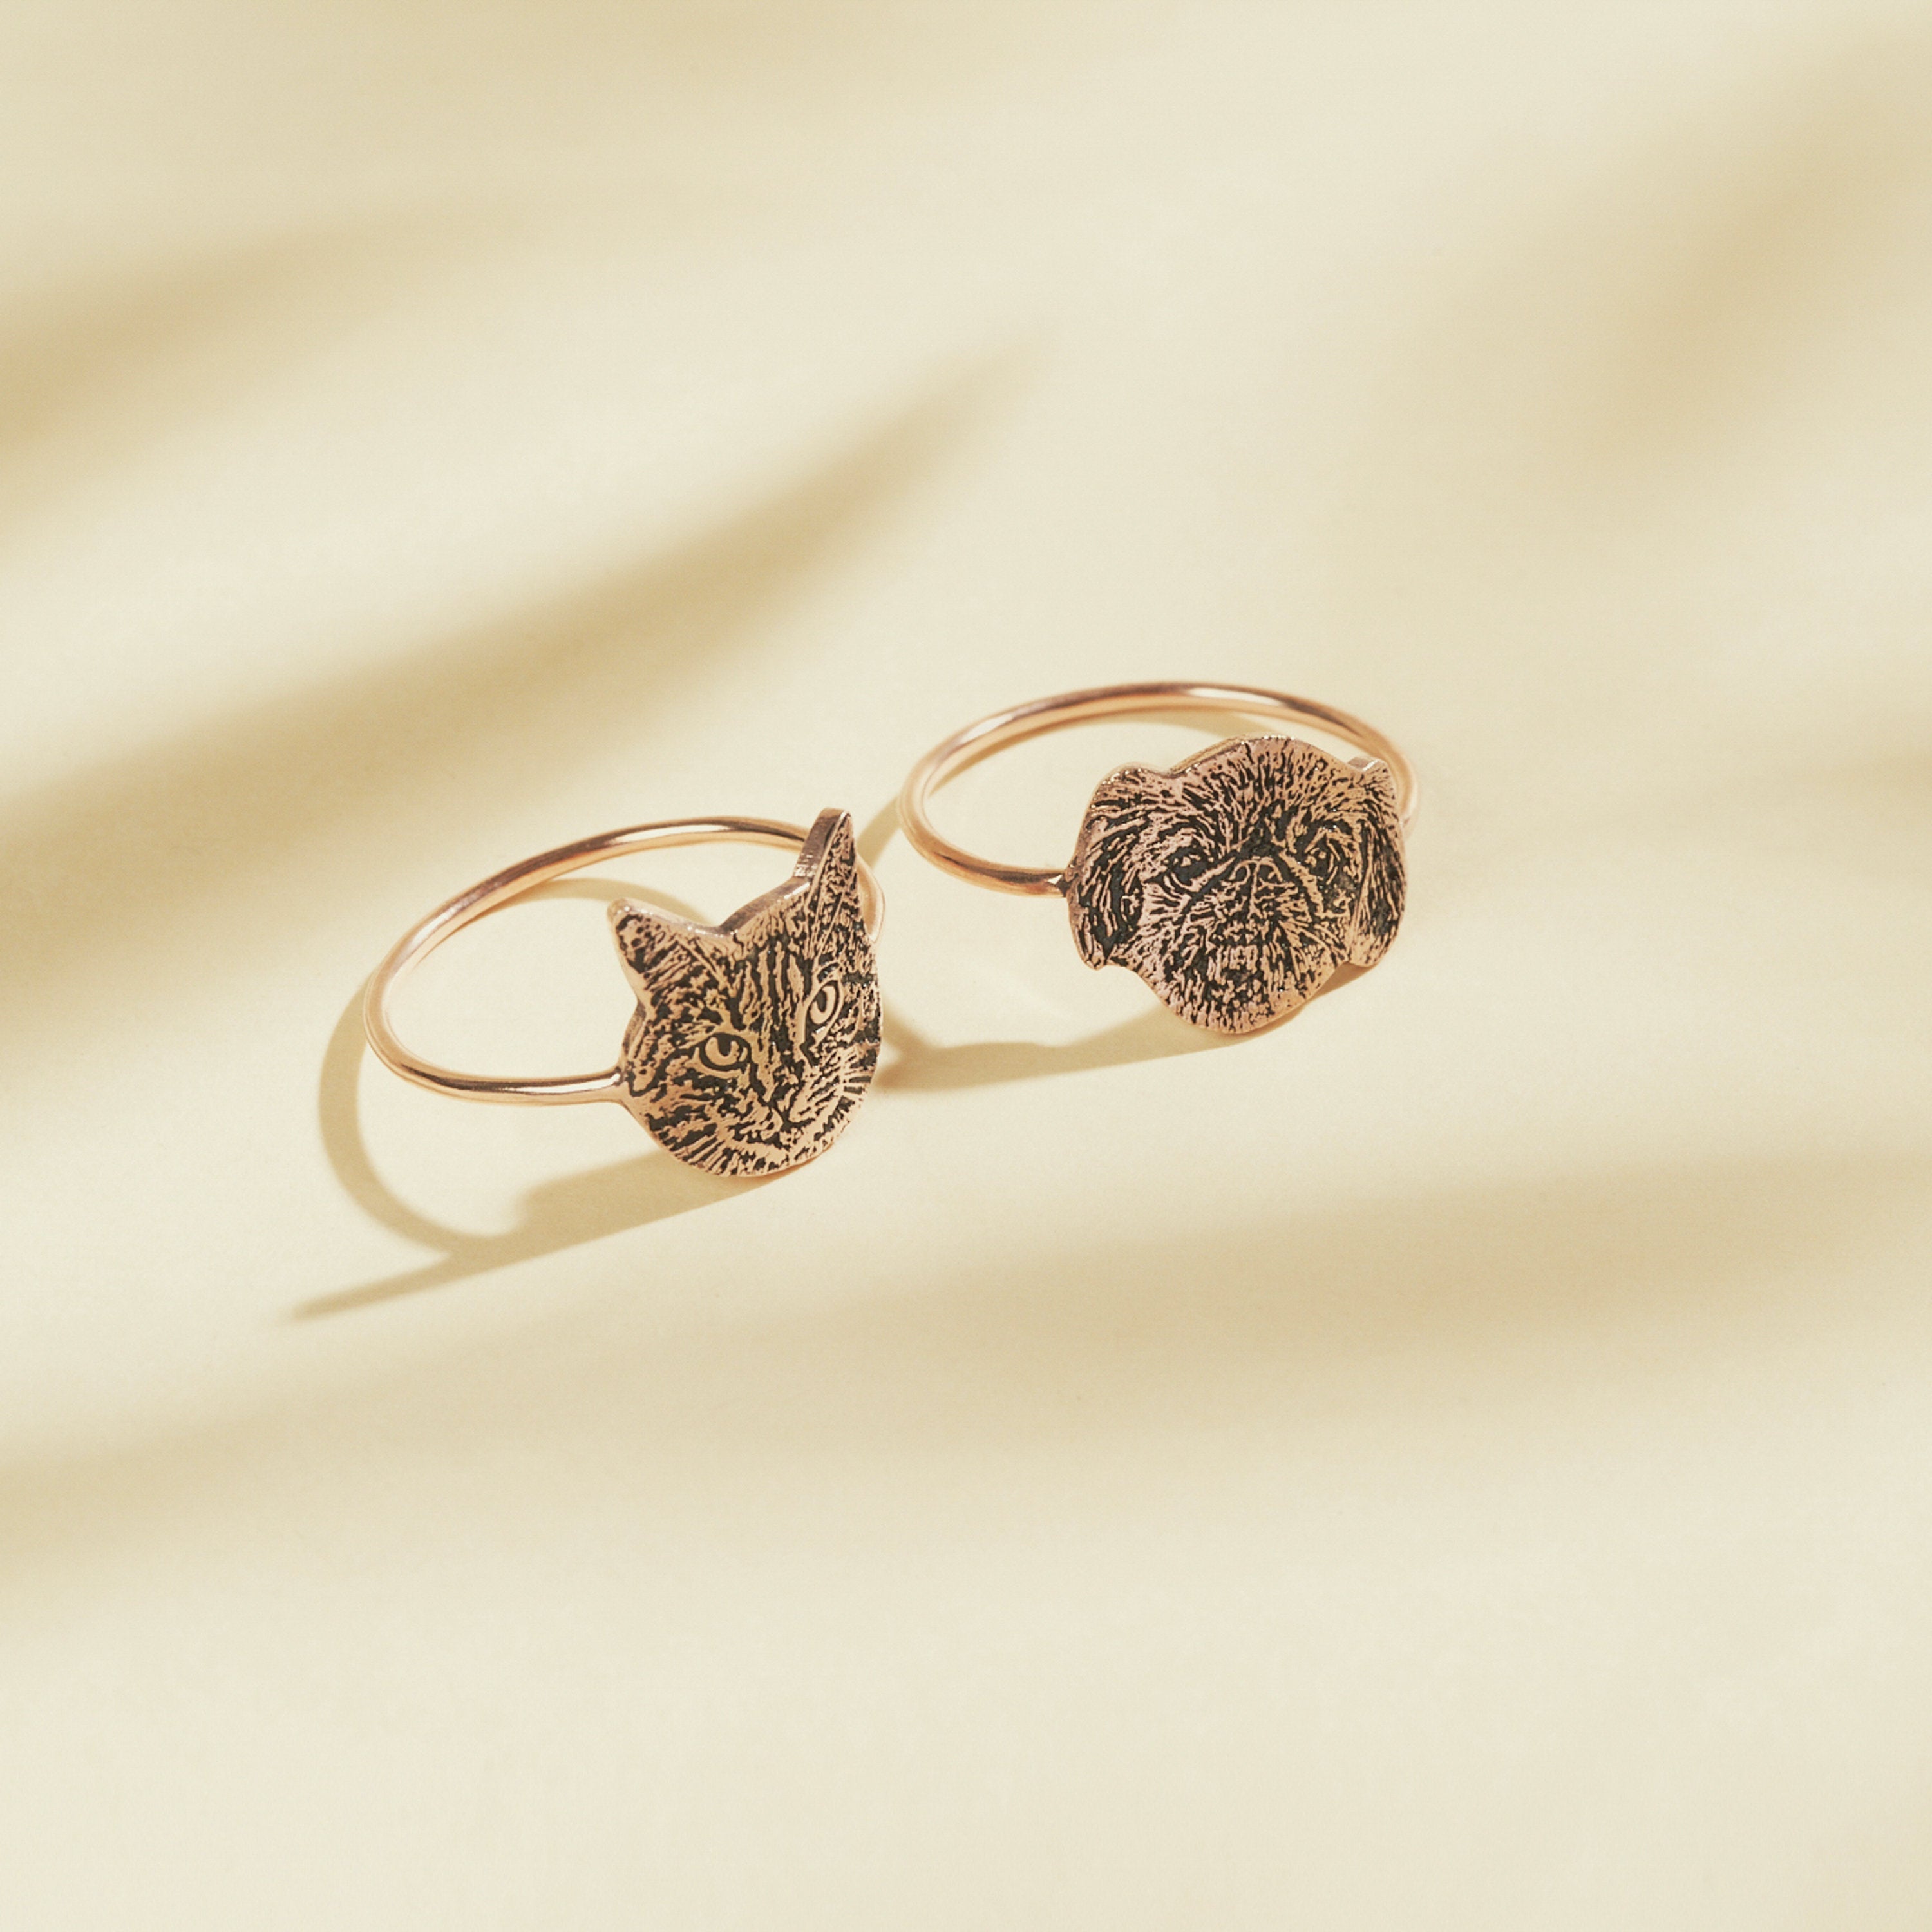 Personalized Pet Ring by Caitlyn Minimalist * Dainty Stackable Engraved Animal Initial Ring * Pet Memorial Jewelry, Pet Lover Gift * RM47F77